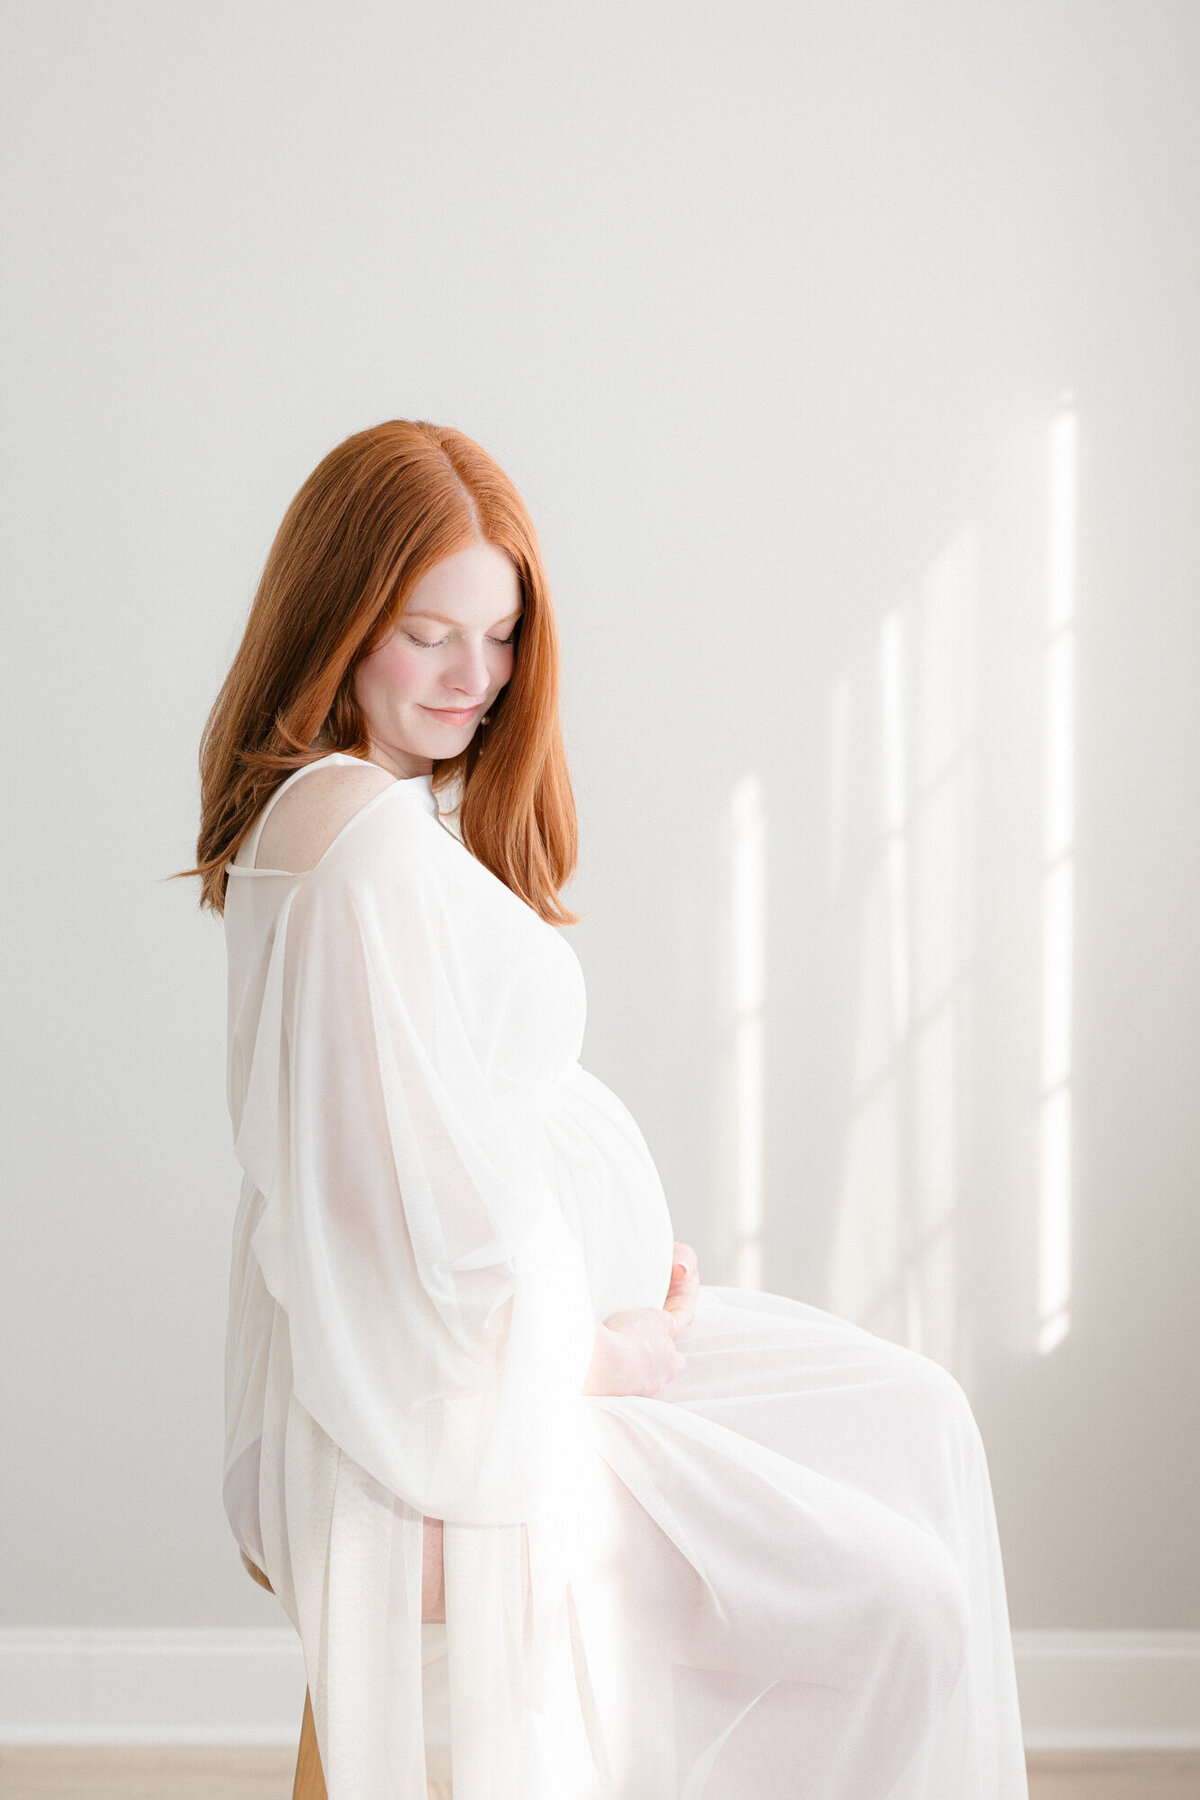 Pregnant mom wearing a white chiffon dress in a Louisville photography studio